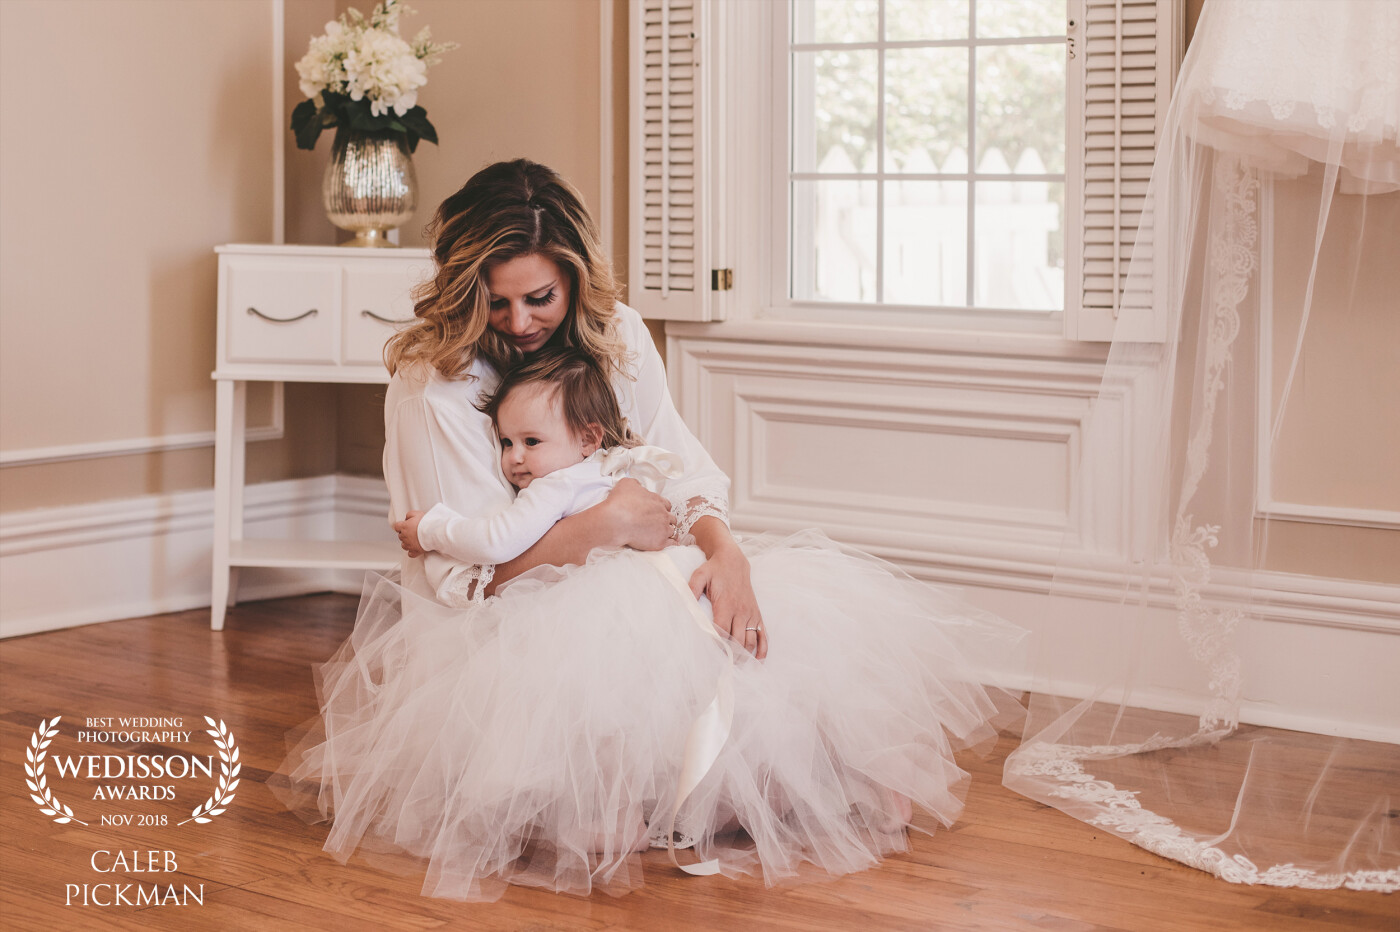 Bride to be and her daughter cuddling up and admiring mom's dress! This moment is a once and a lifetime moment. This photo says it all.